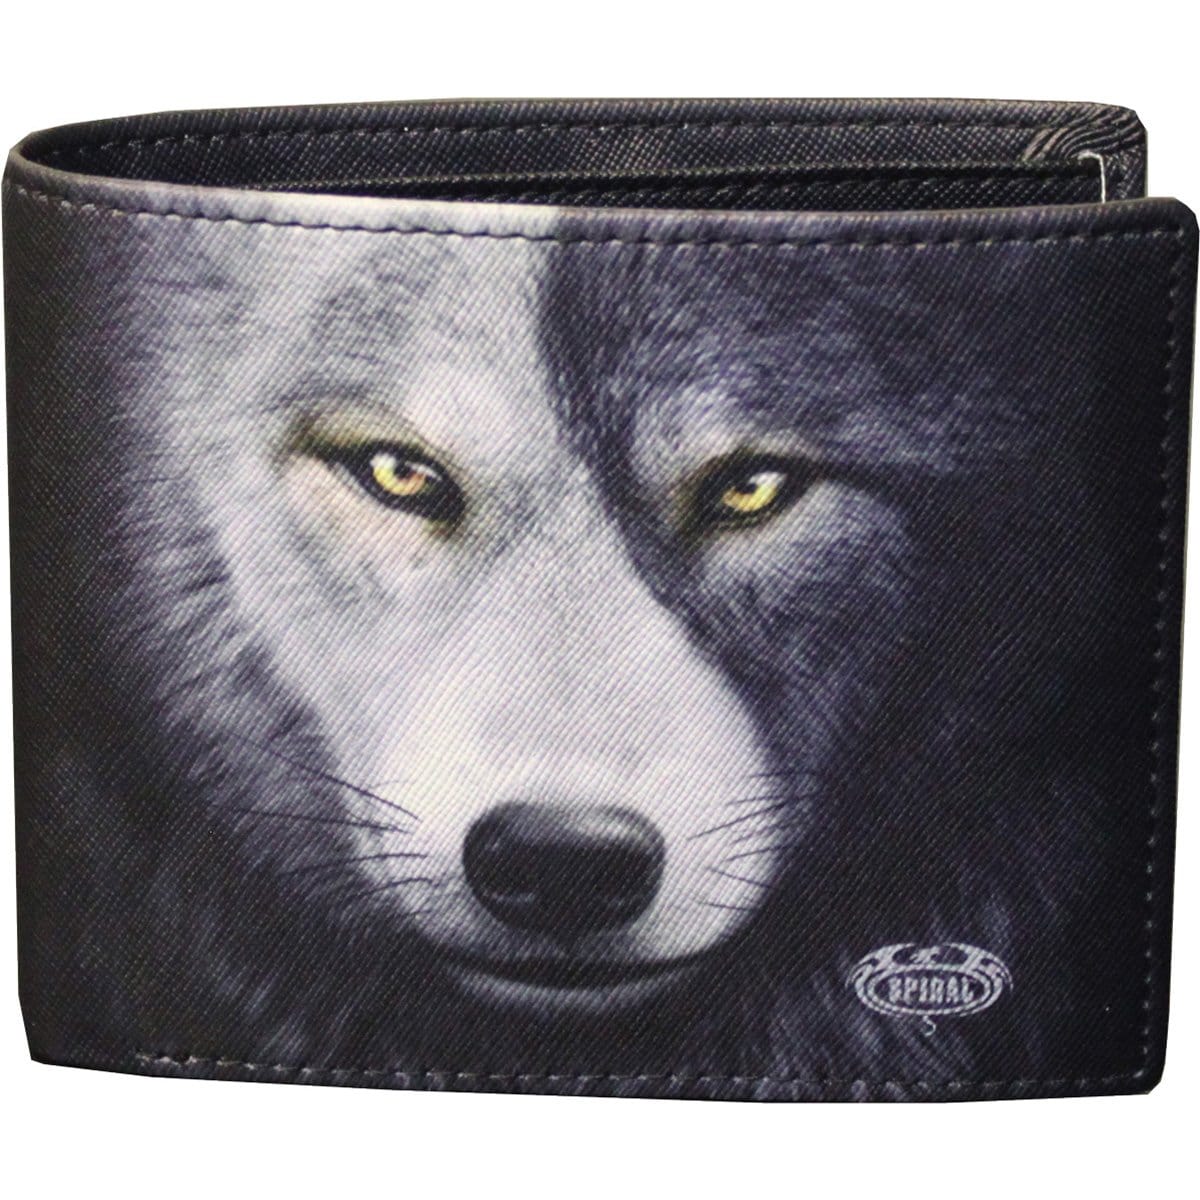 WOLF CHI - BiFold Wallet with RFID Blocking and Gift Box - Spiral USA